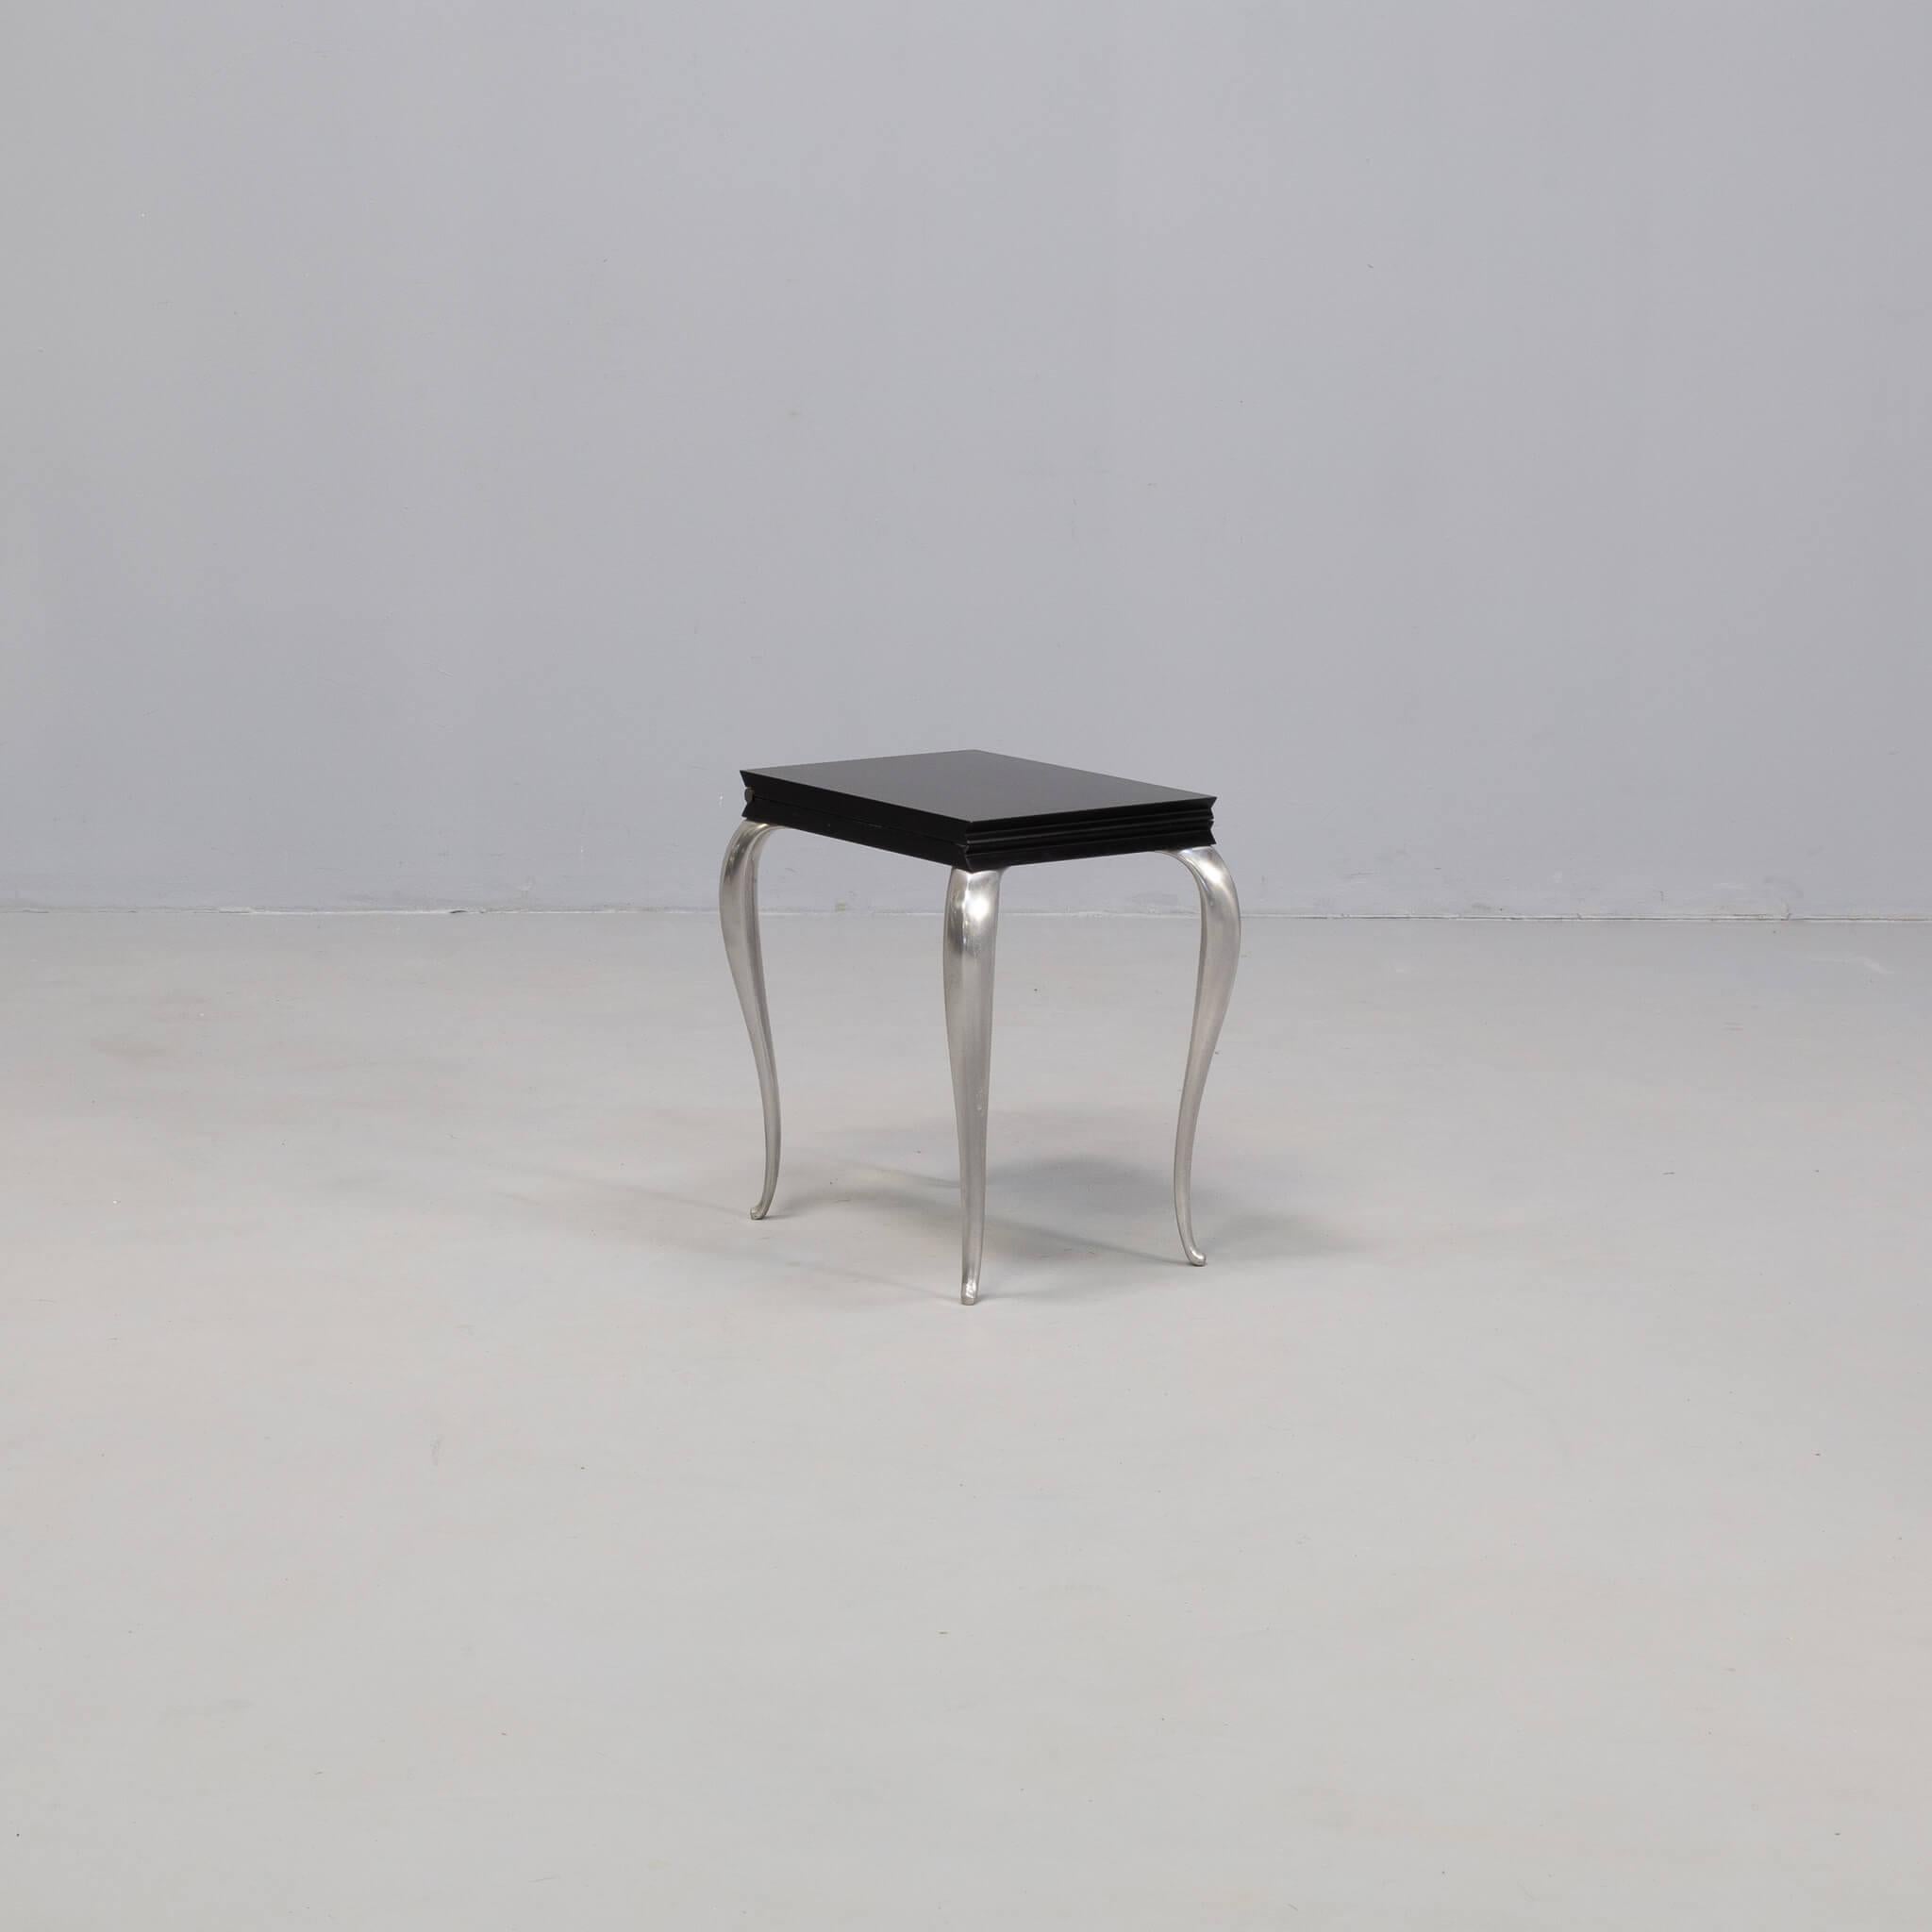 80s Philippe Starck ‘lola mundo’ table chair for Driade In Good Condition For Sale In Amstelveen, Noord